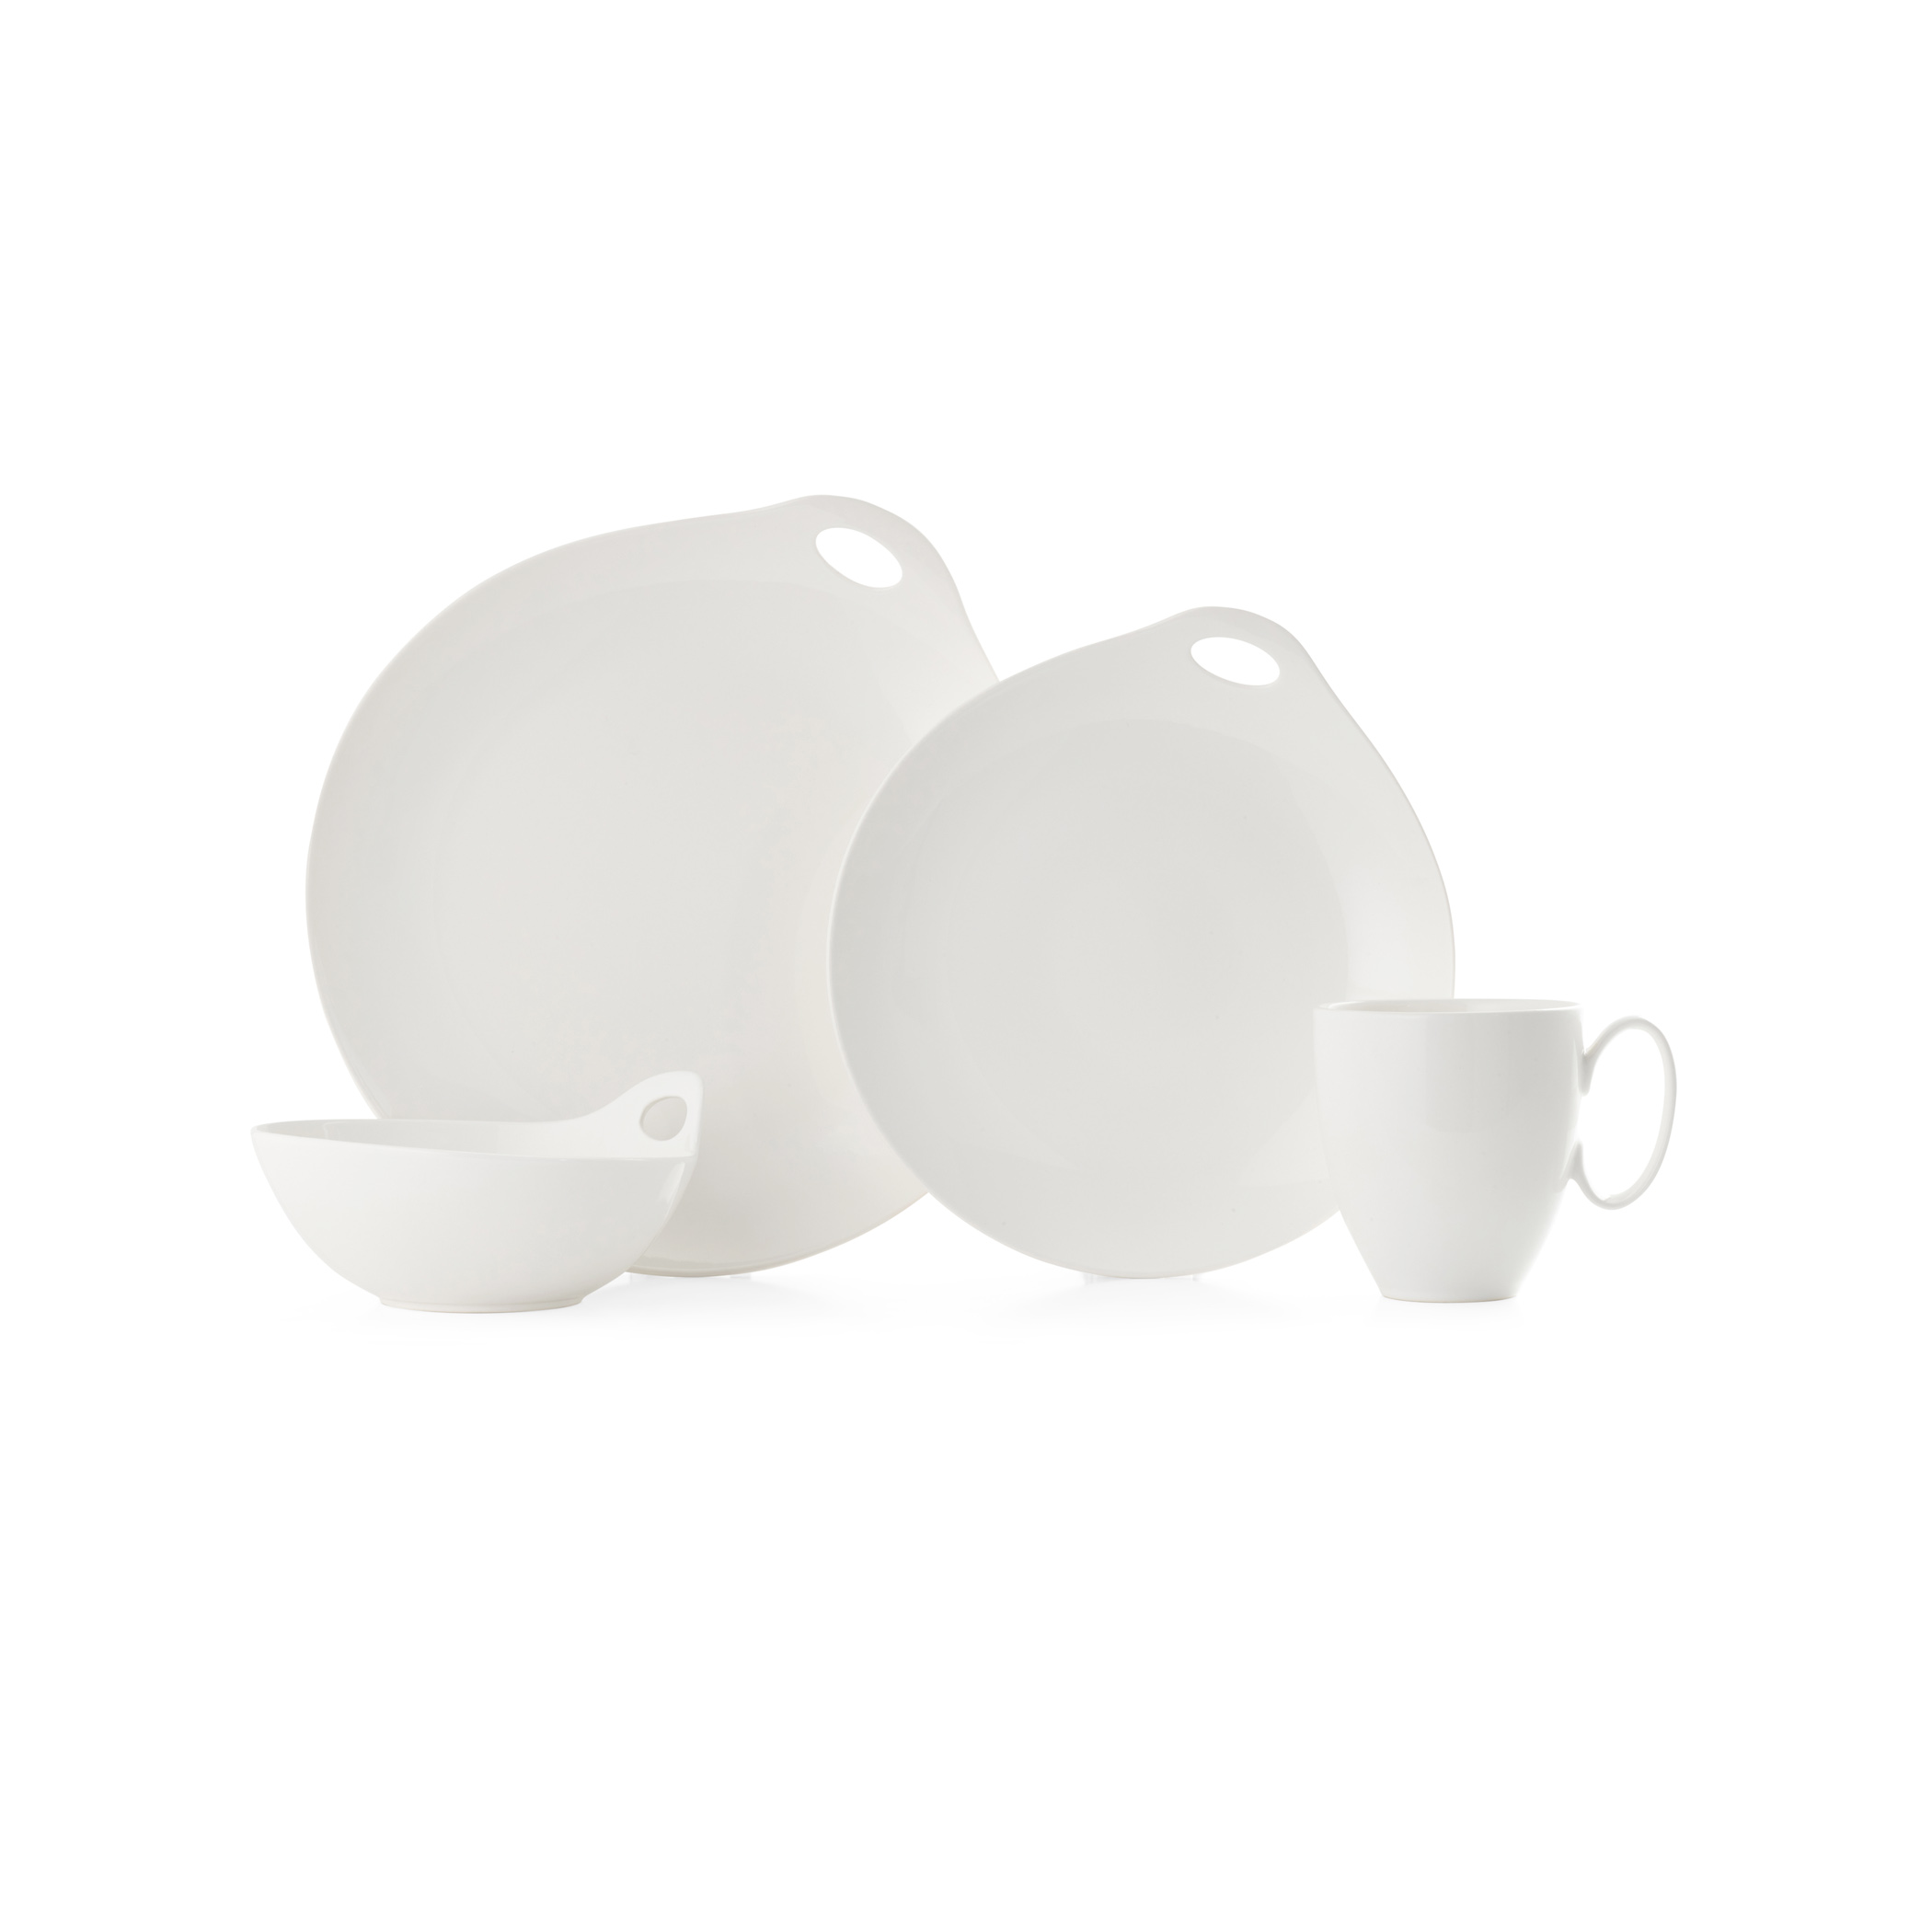 Portables 4 Piece Place Setting image number null